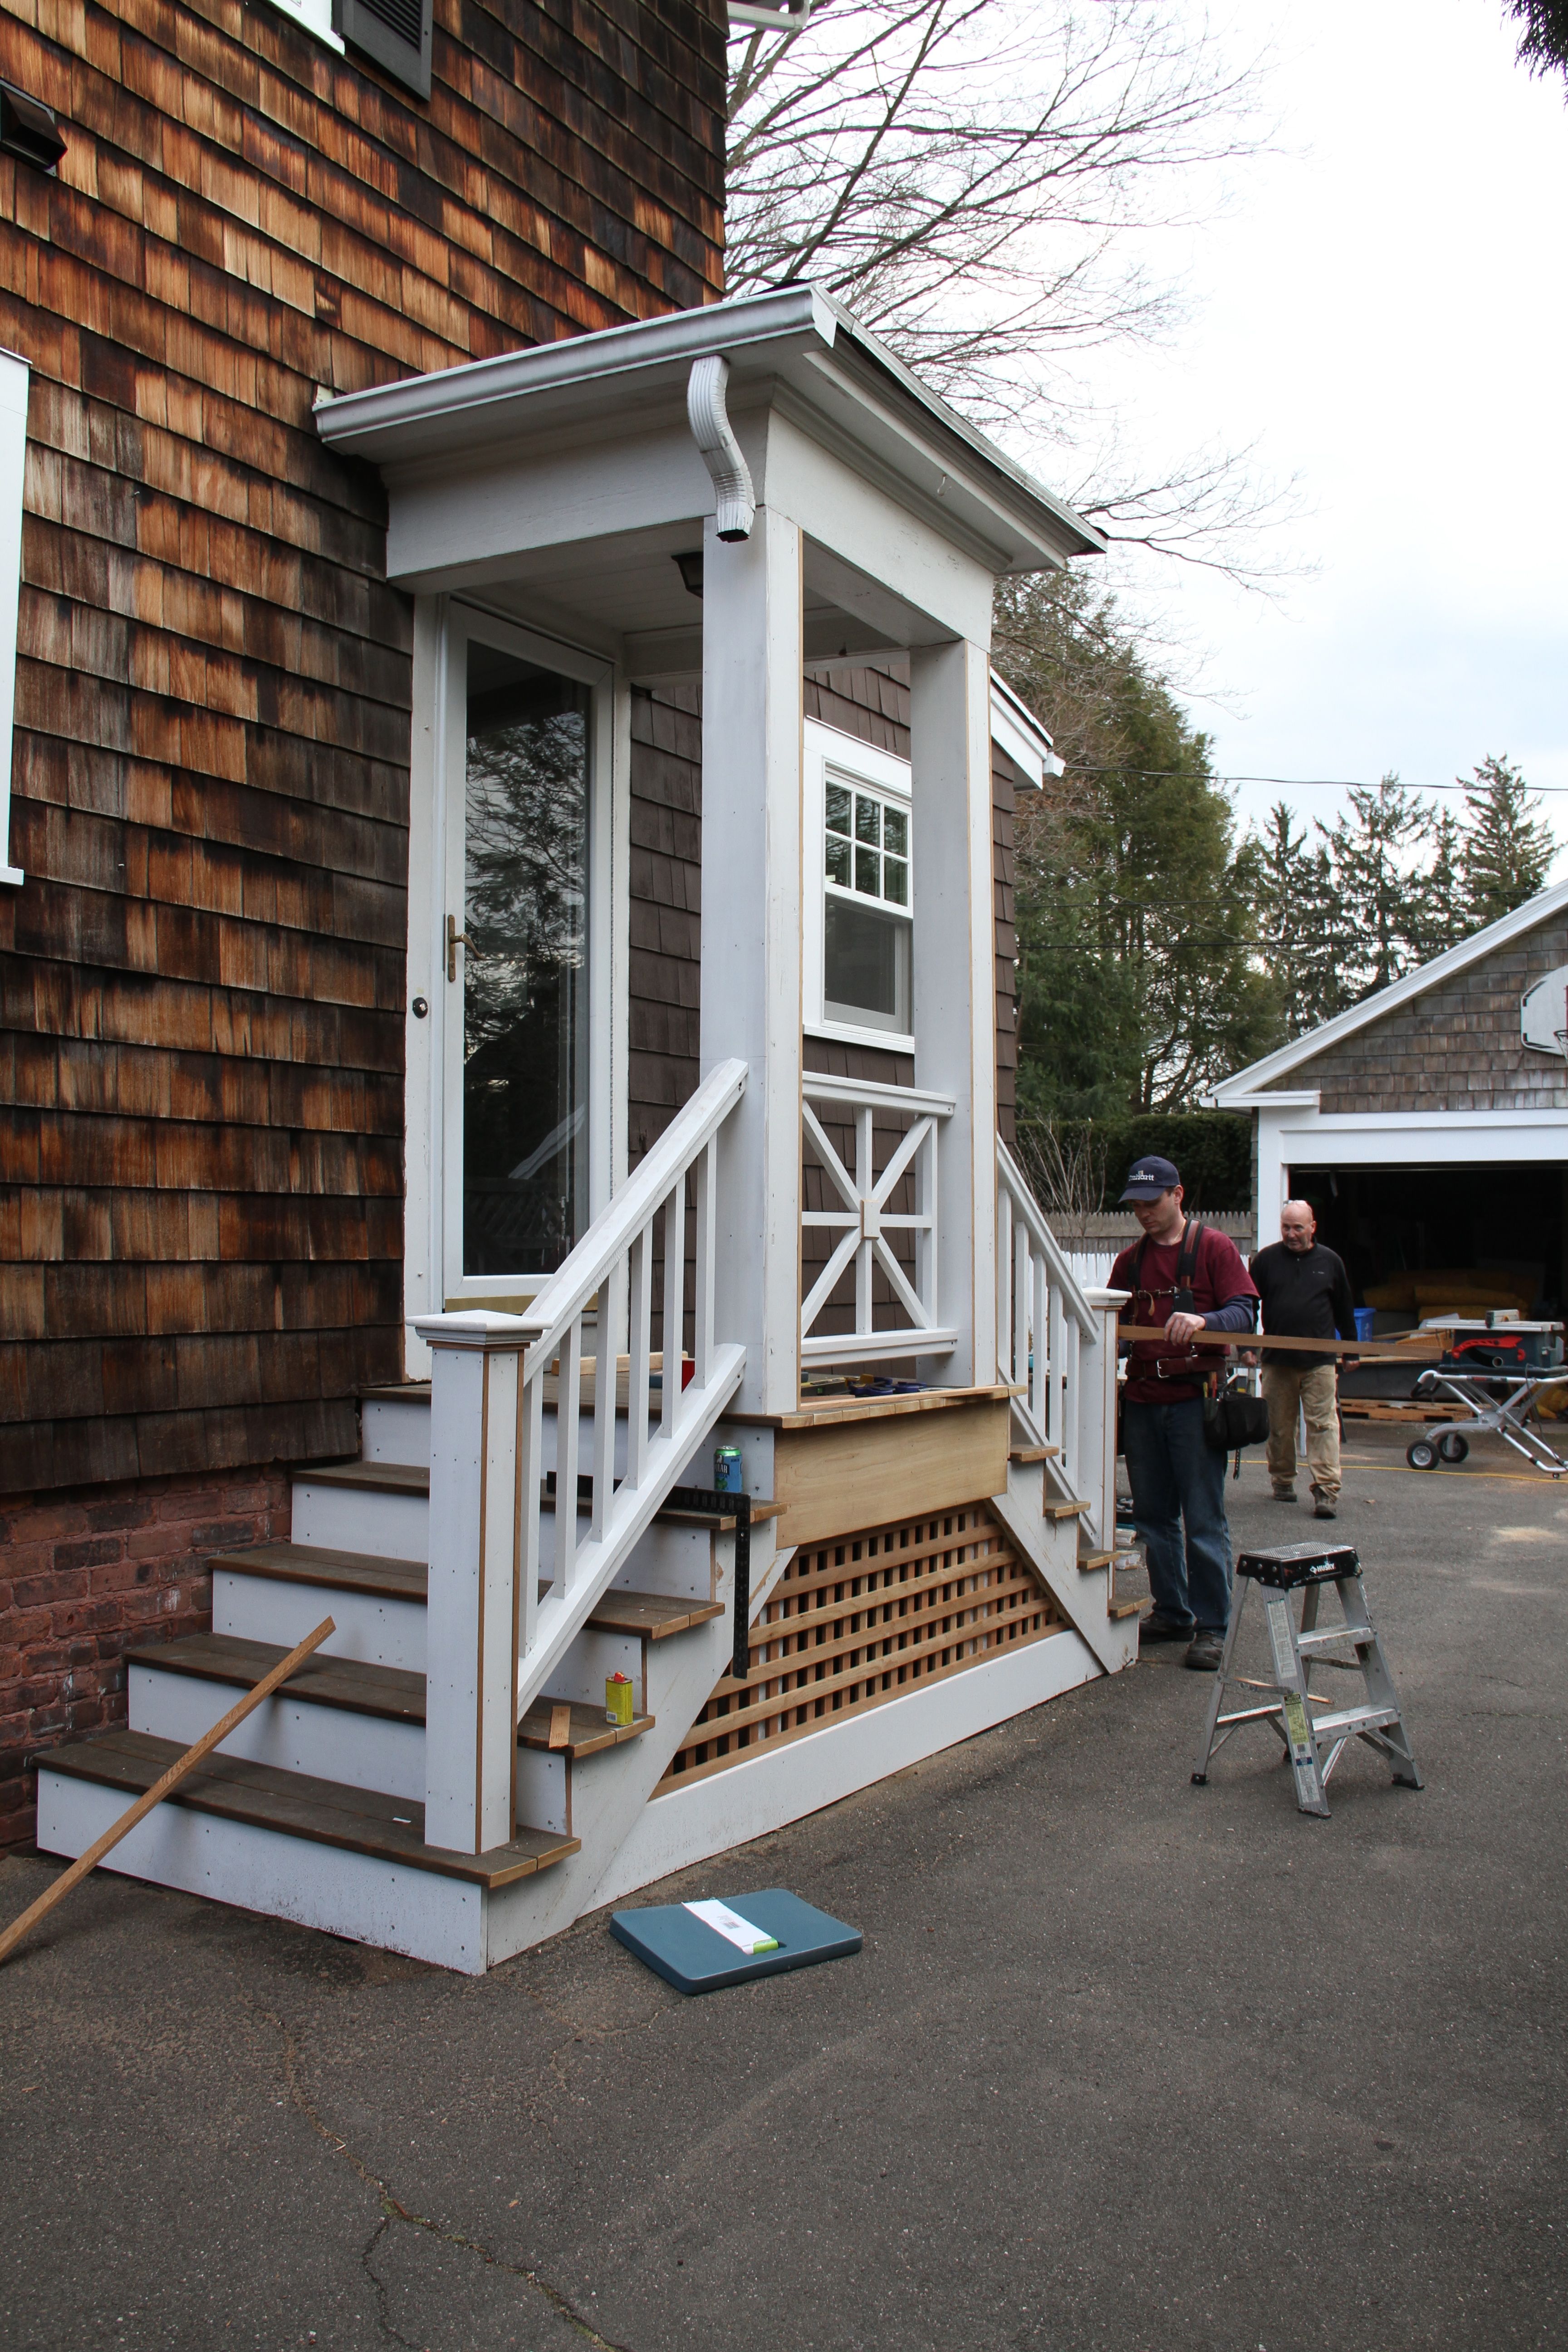 DURING: The entryway - which obviously still needs exterior paint, etc., to be finished - welcoming visitors to step inside.